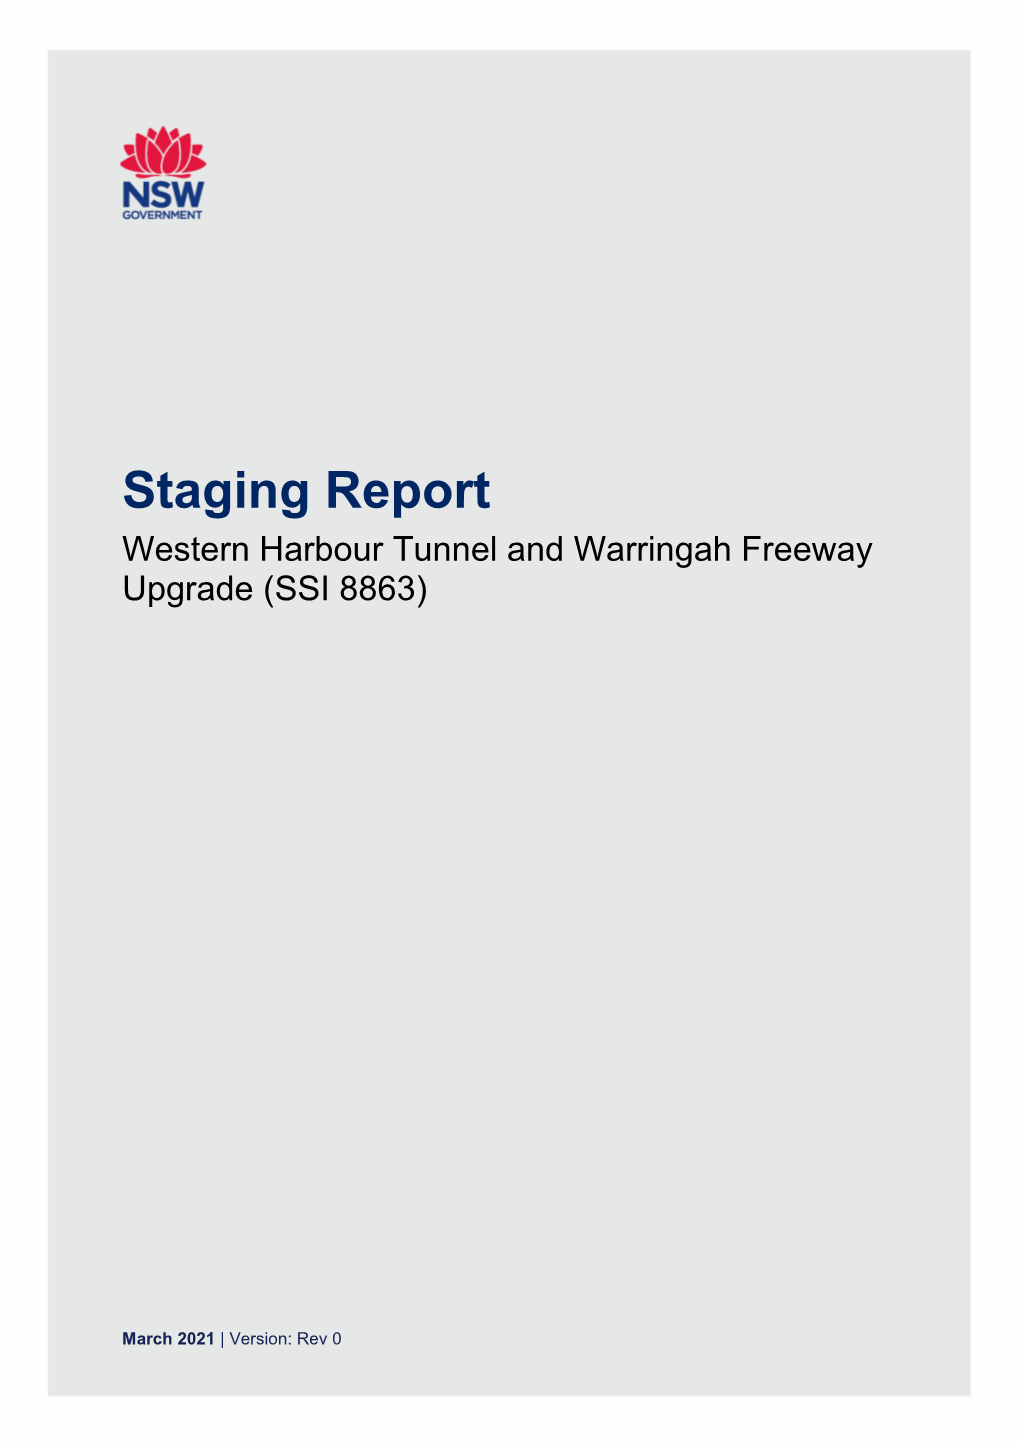 Staging Report Western Harbour Tunnel and Warringah Freeway Upgrade (SSI 8863)